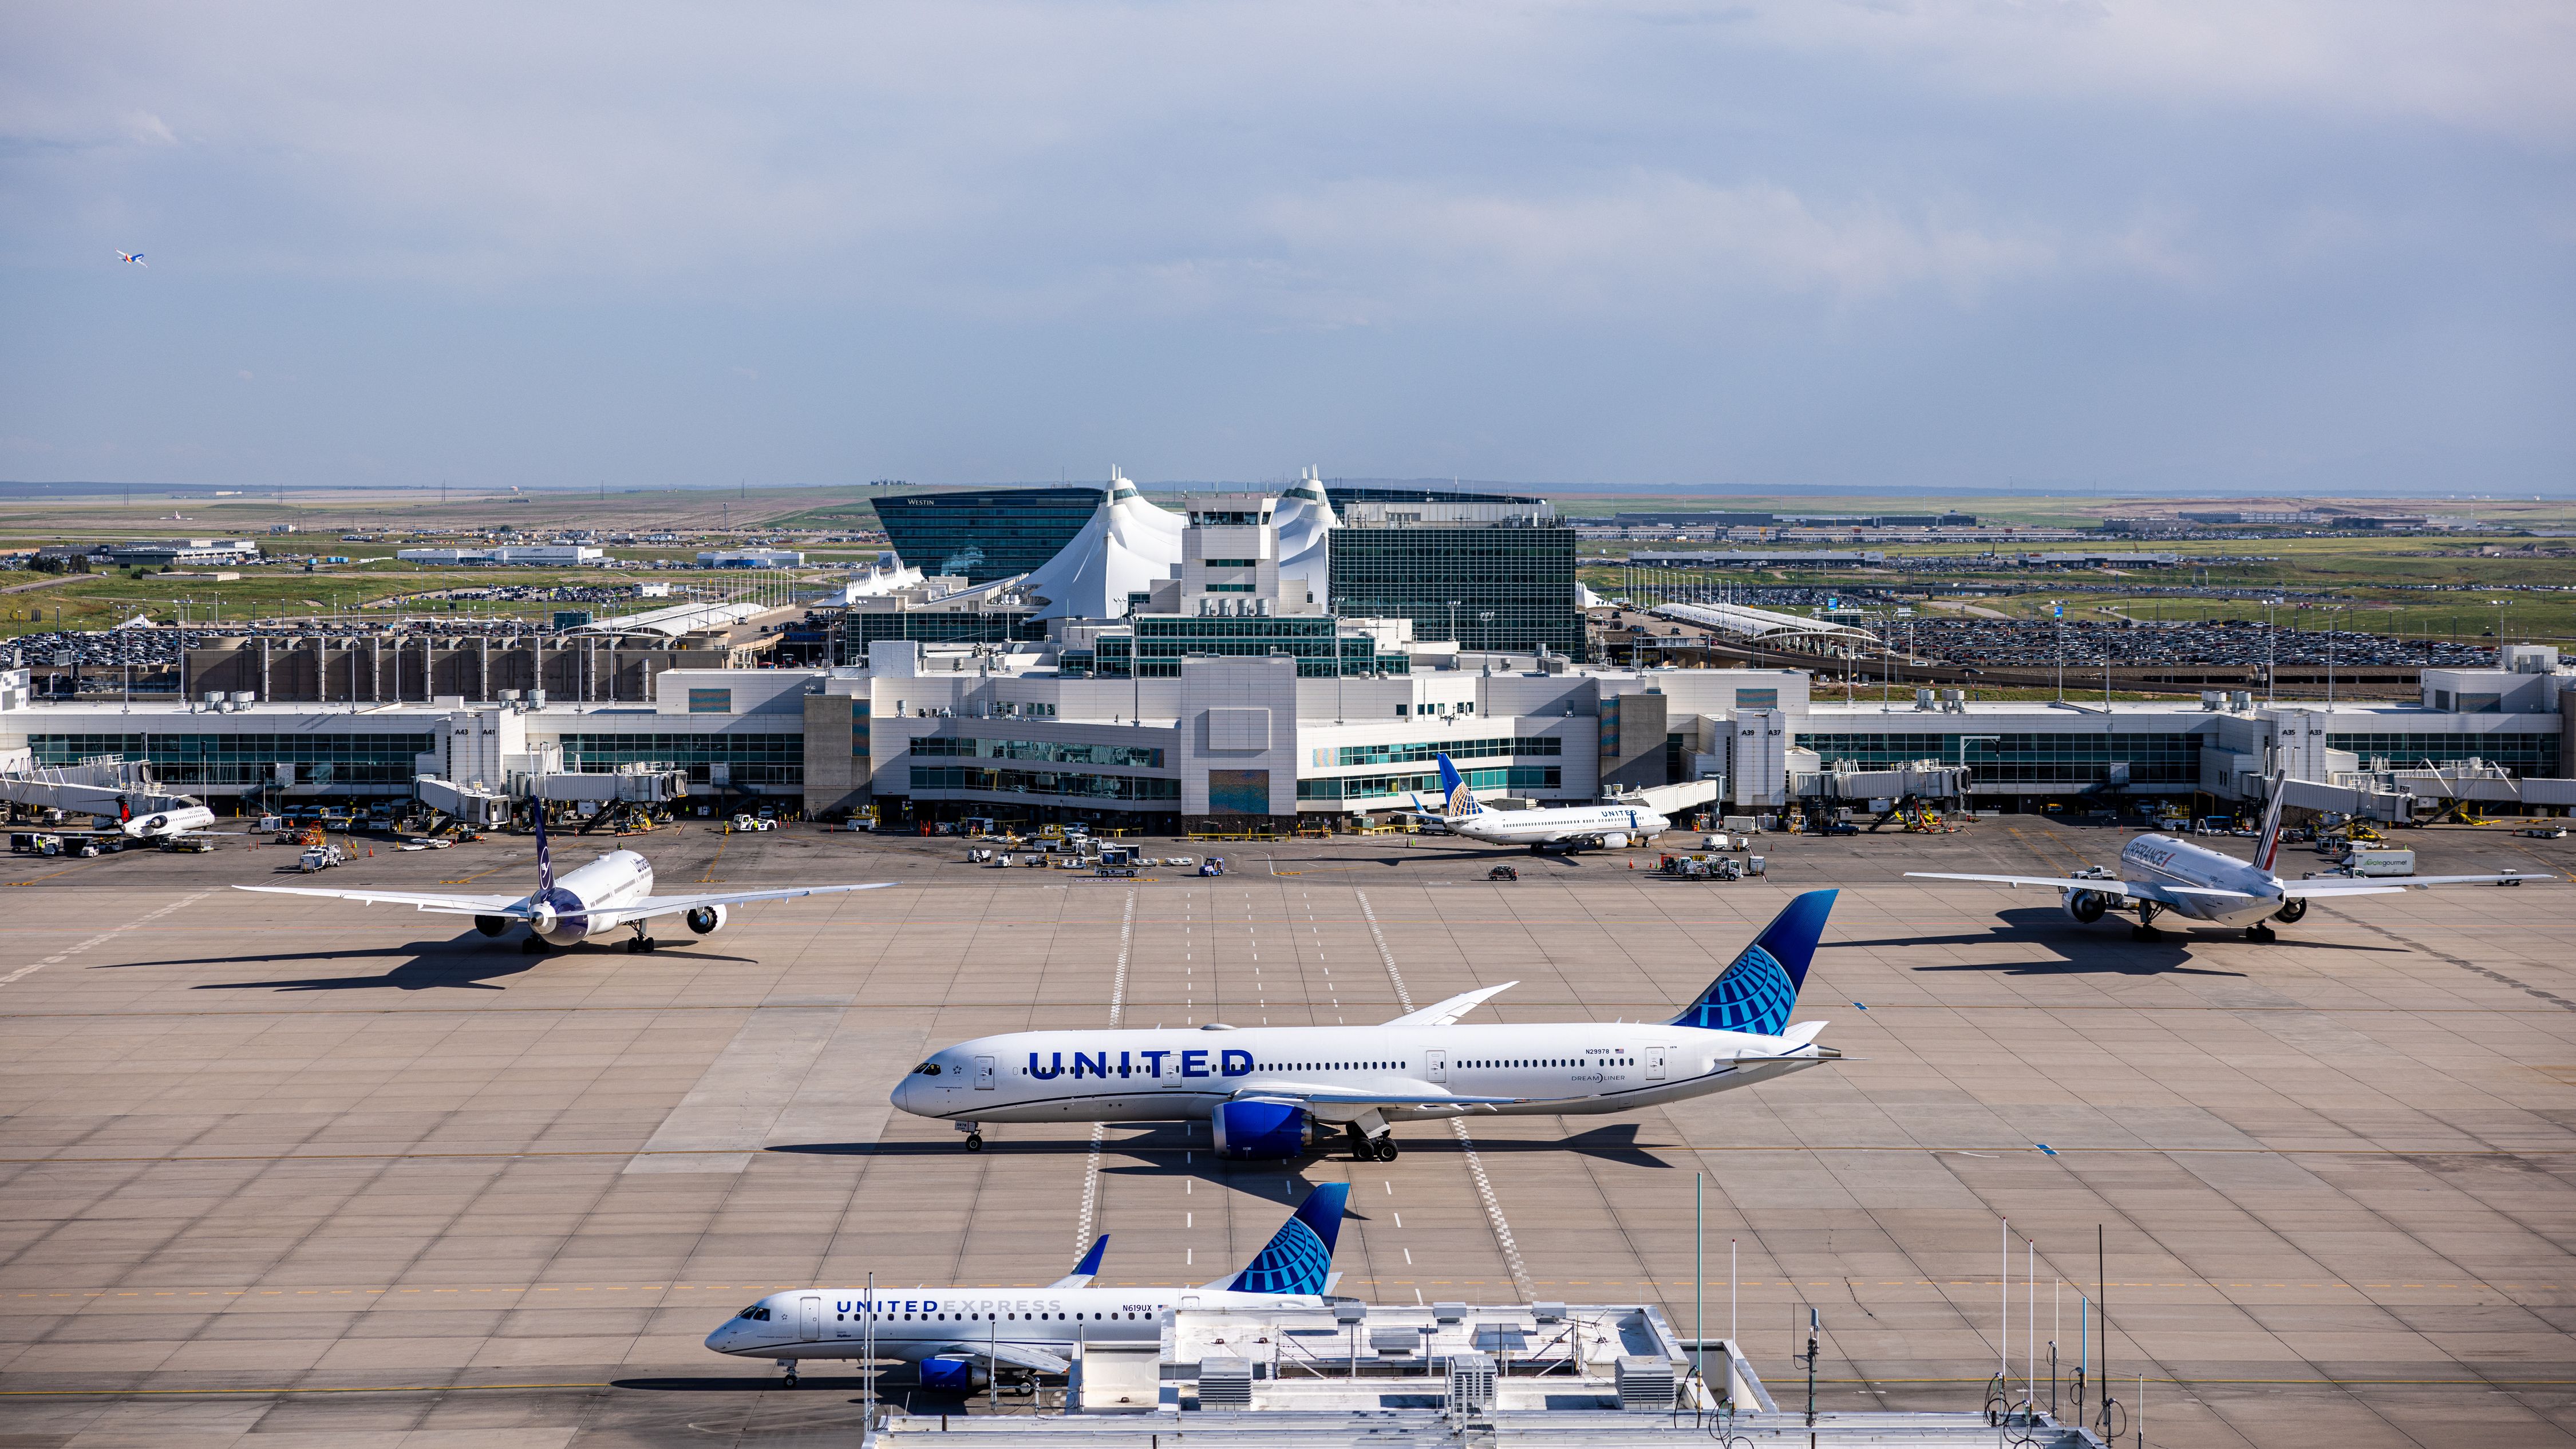 Multiple United Airlines aircraft parked on the airfield of Denver International Airport.